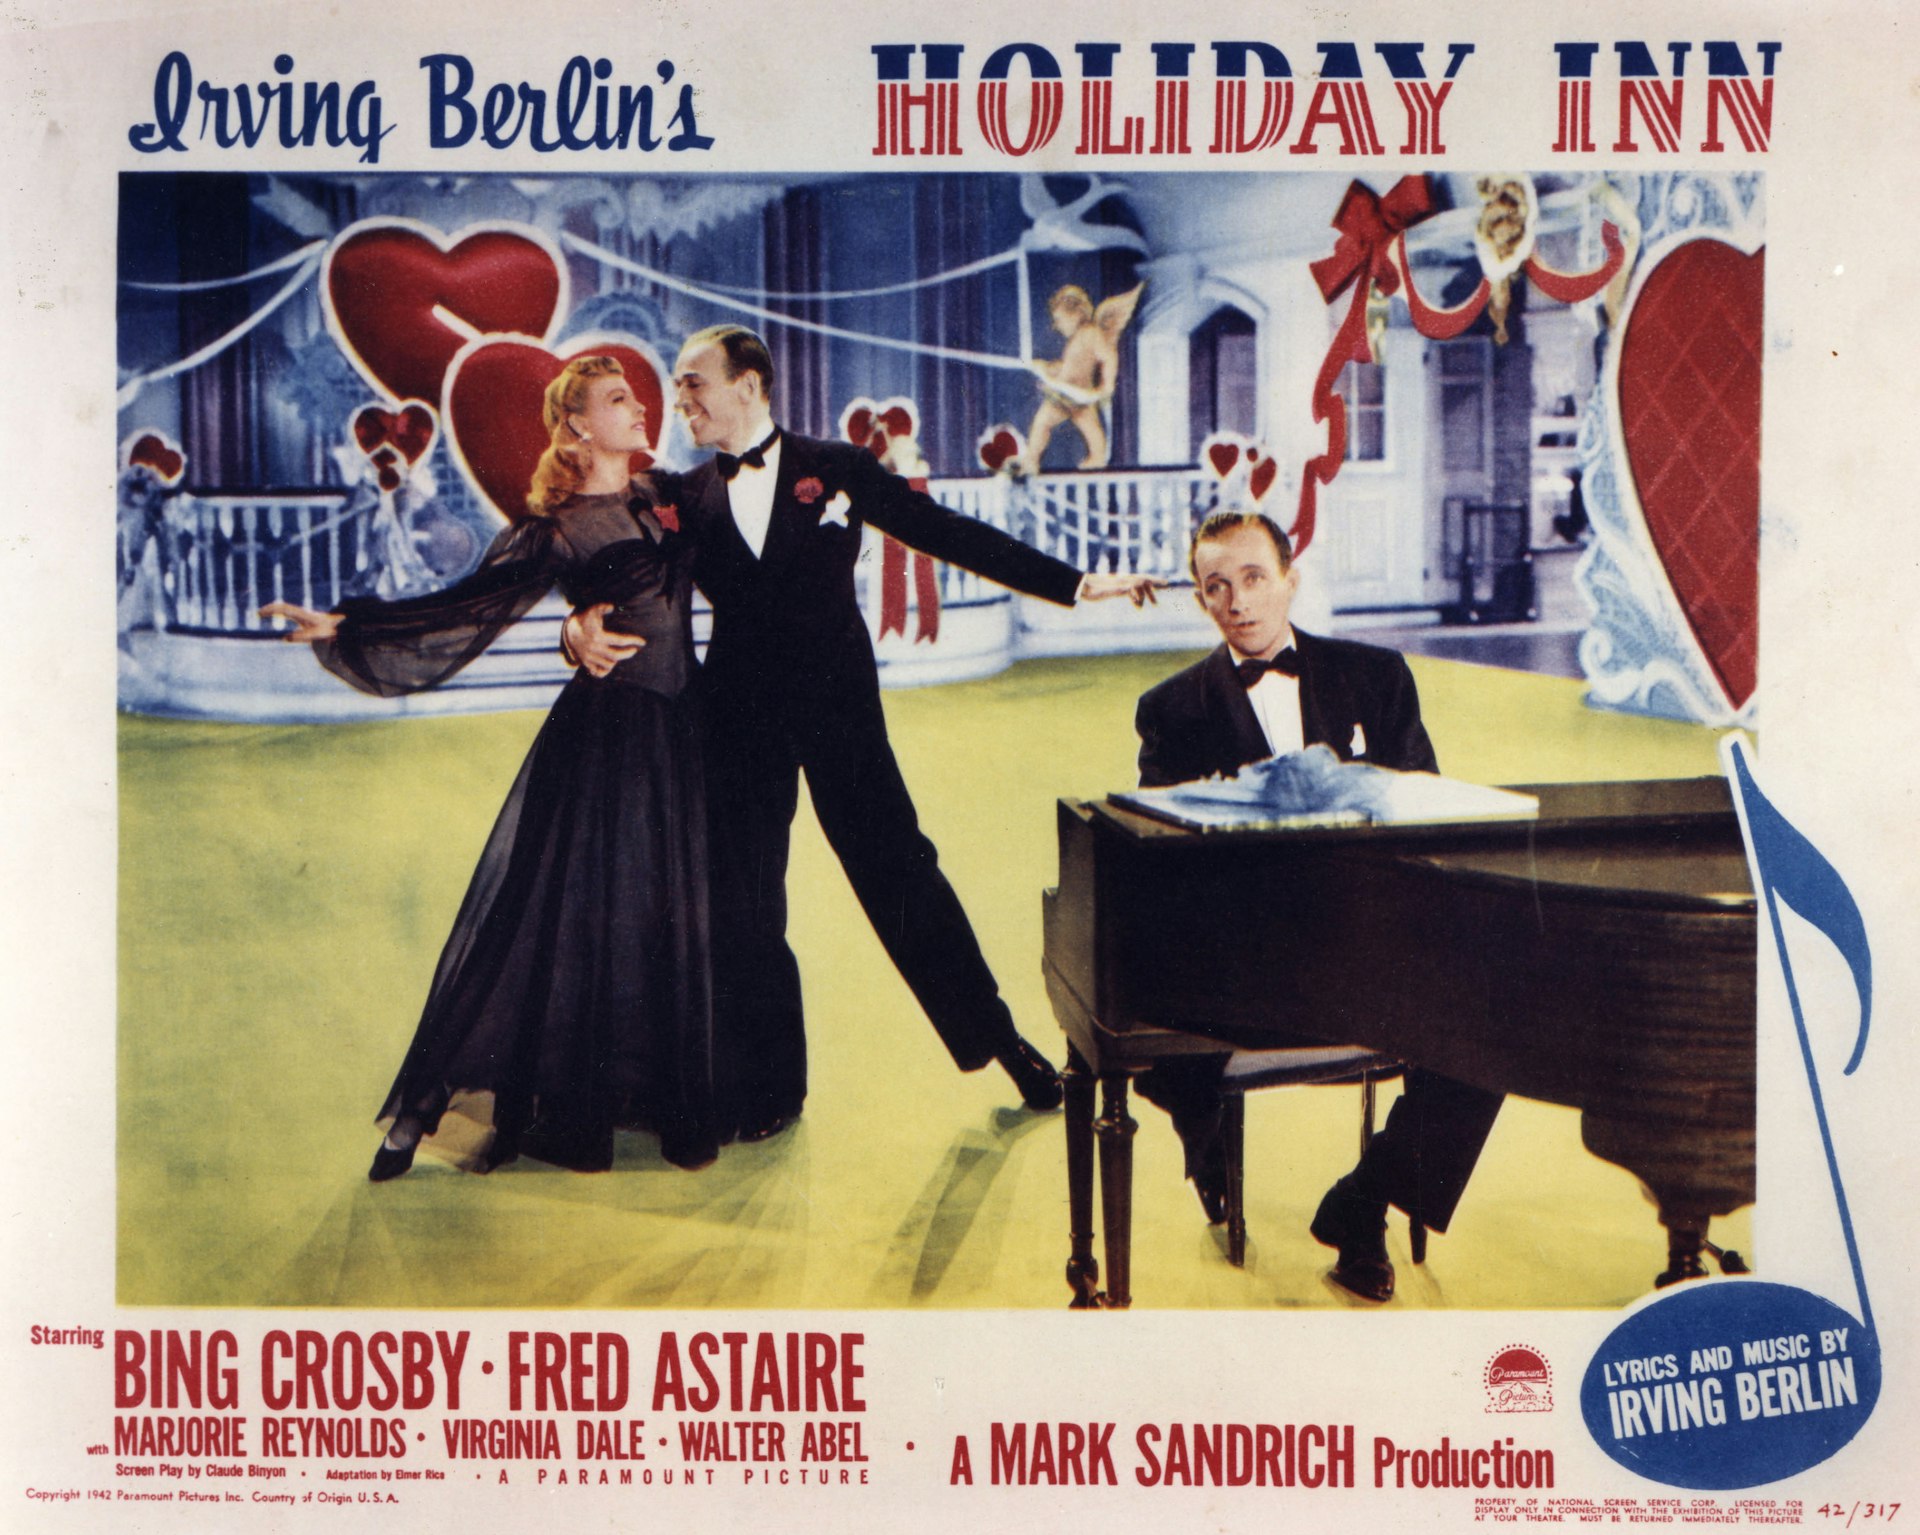 Bing Crosy plays the piano as Fred Astaire dances with Virginia Dale in the poster for Holiday Inn